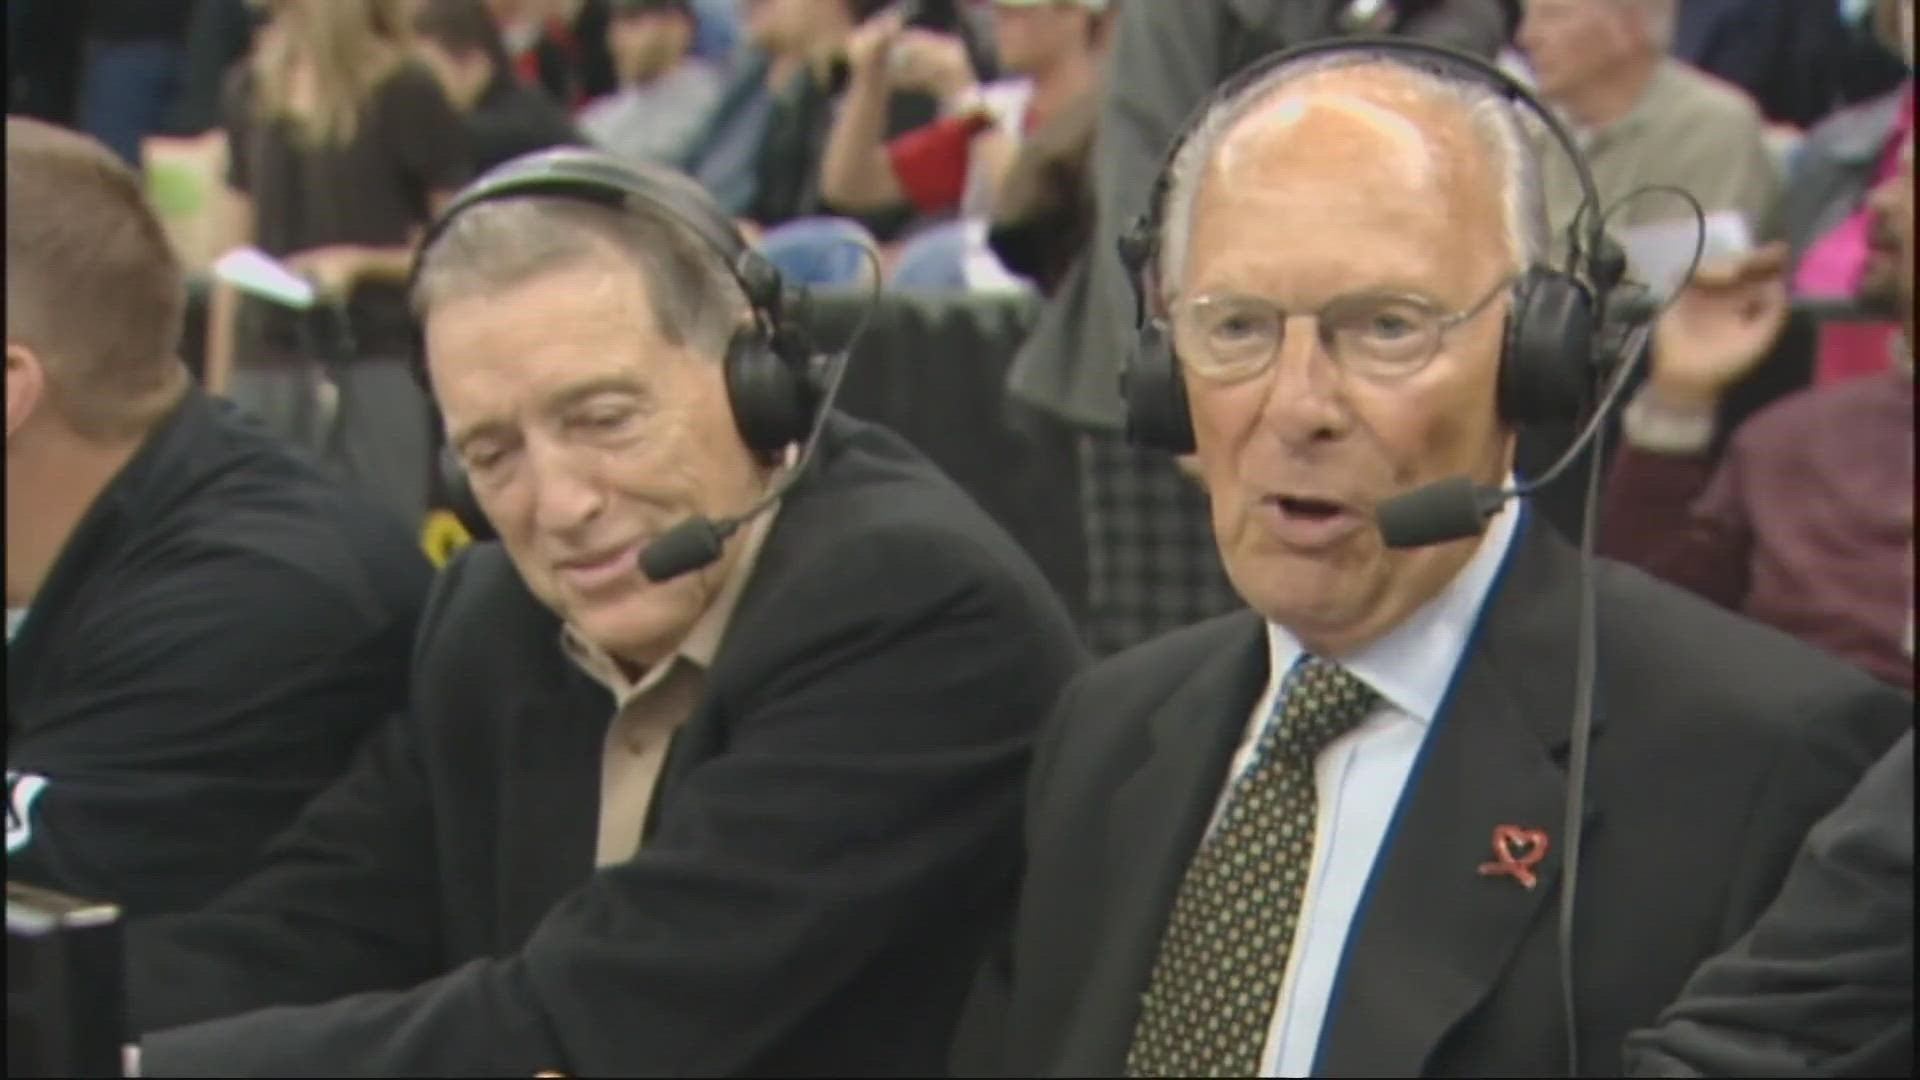 A special ceremony was held for Portland Trail Blazers legend Bill Schonely, 93, who passed Saturday. He was the team's play by play broadcaster for nearly 30 years.